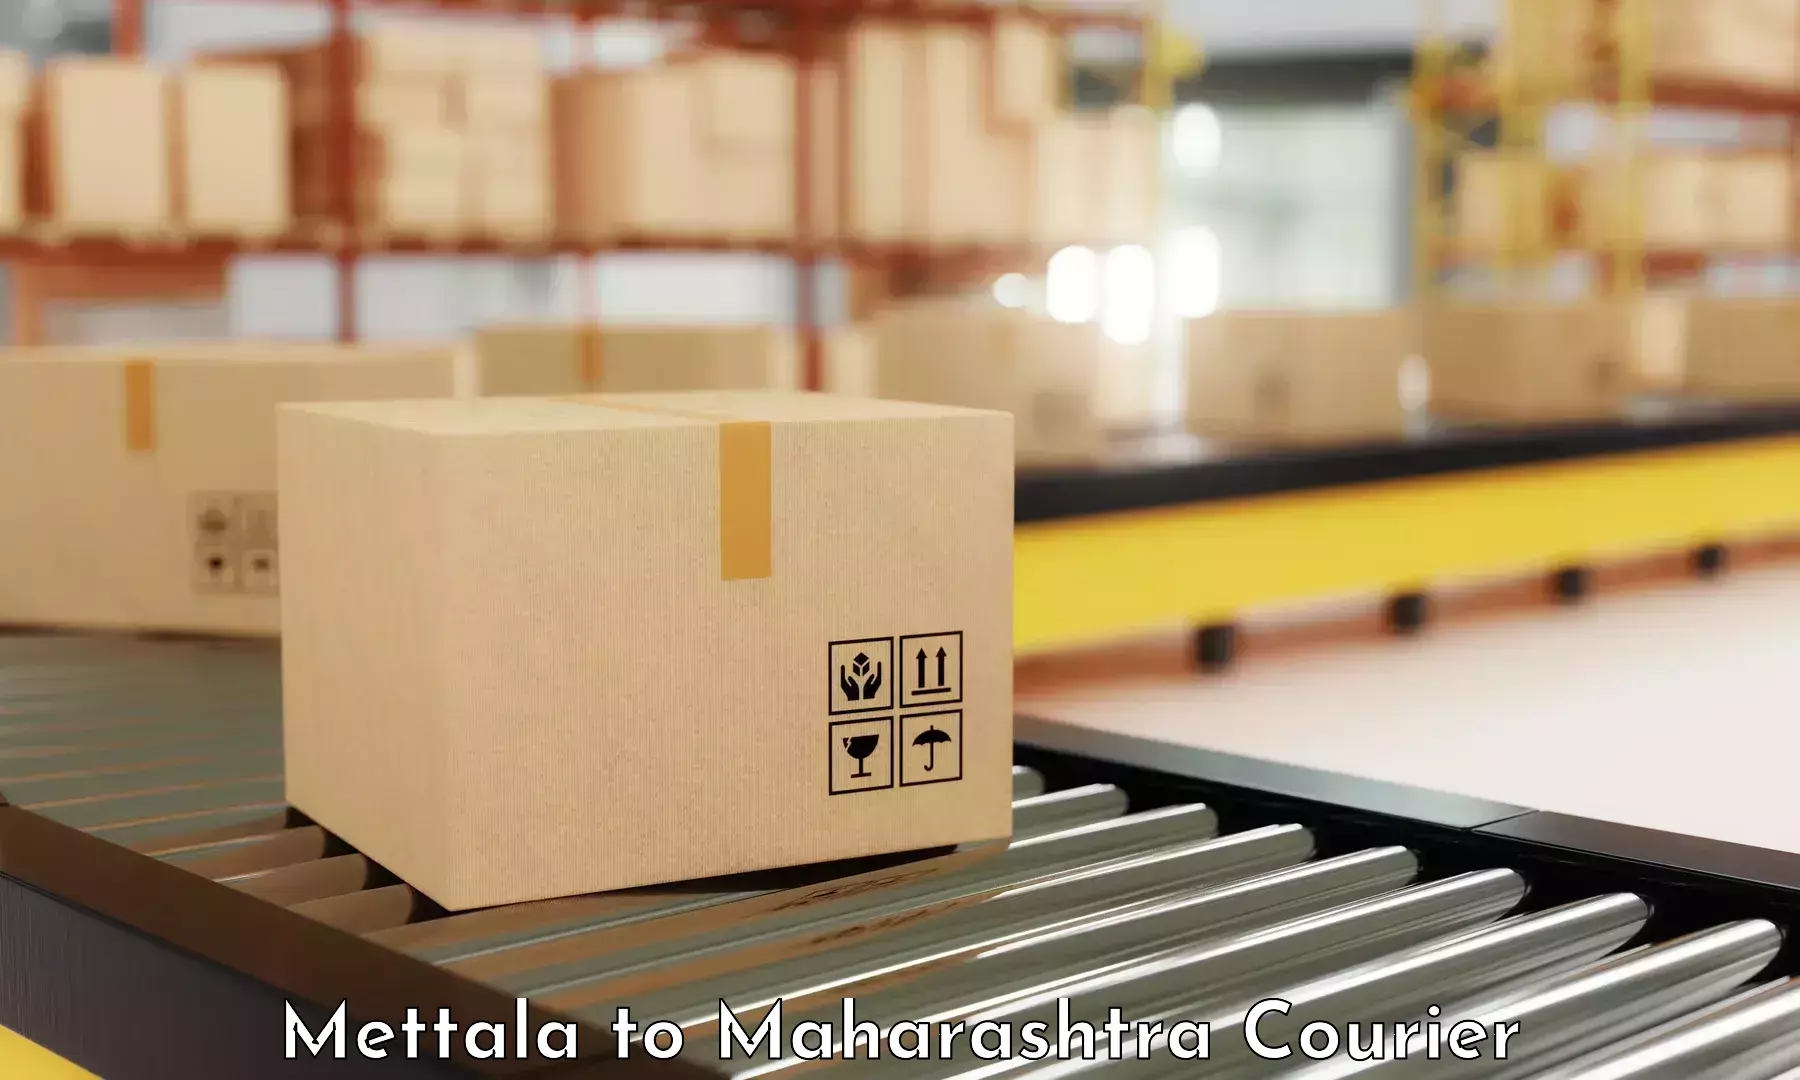 Comprehensive shipping services Mettala to Dusarbid